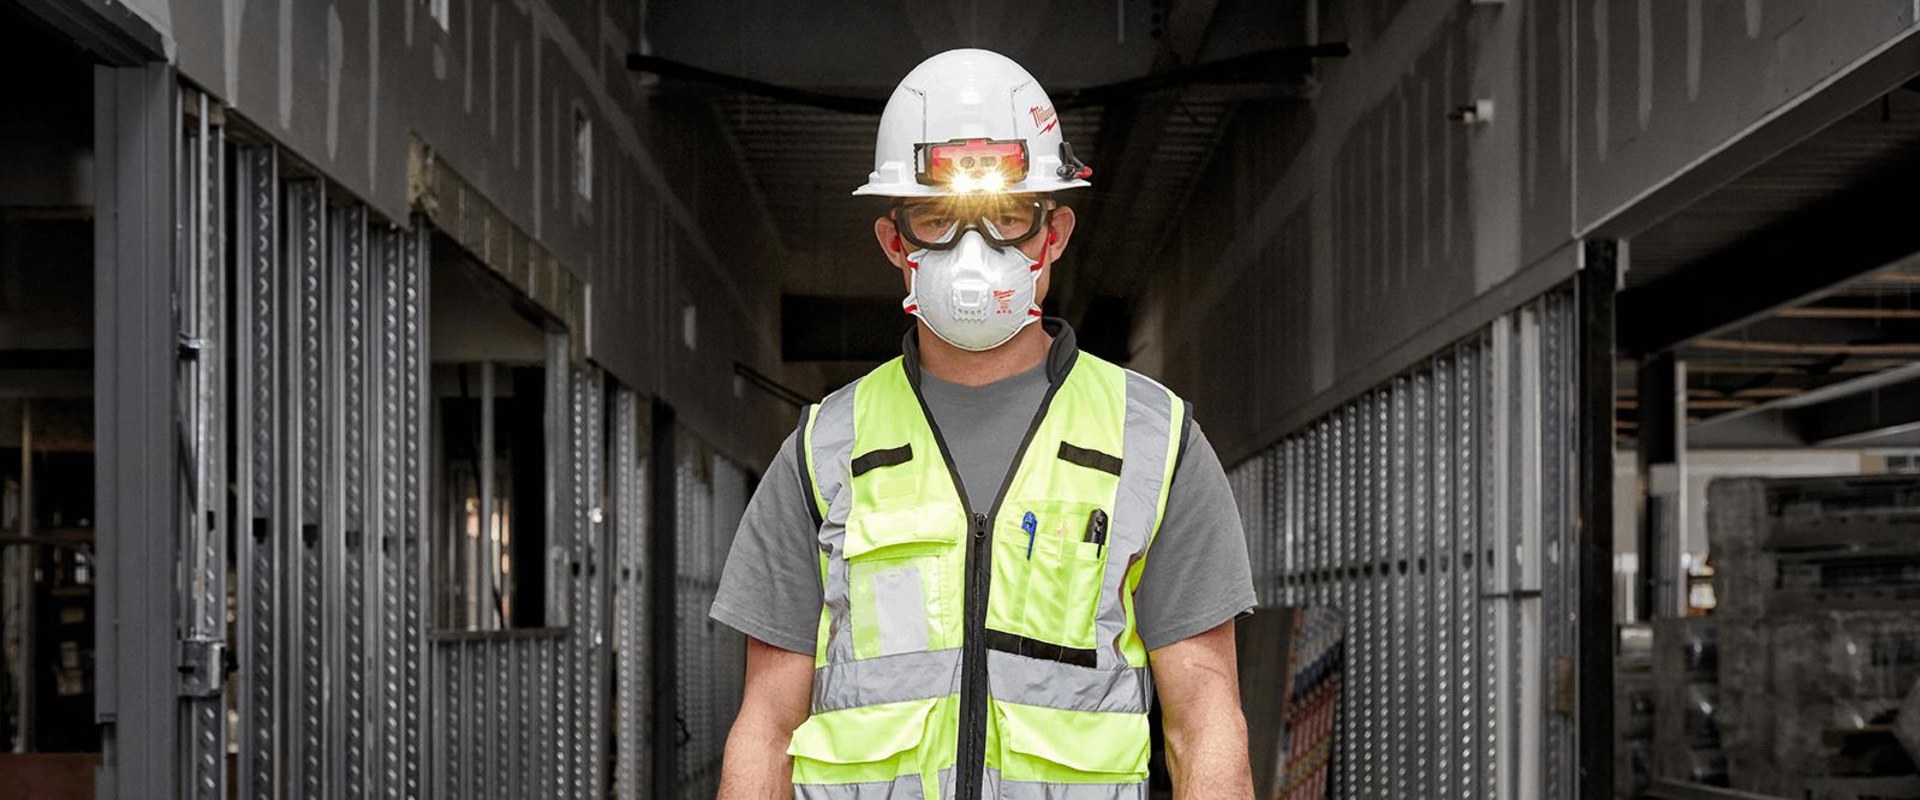 Safety Gear and Equipment Requirements for Drivers